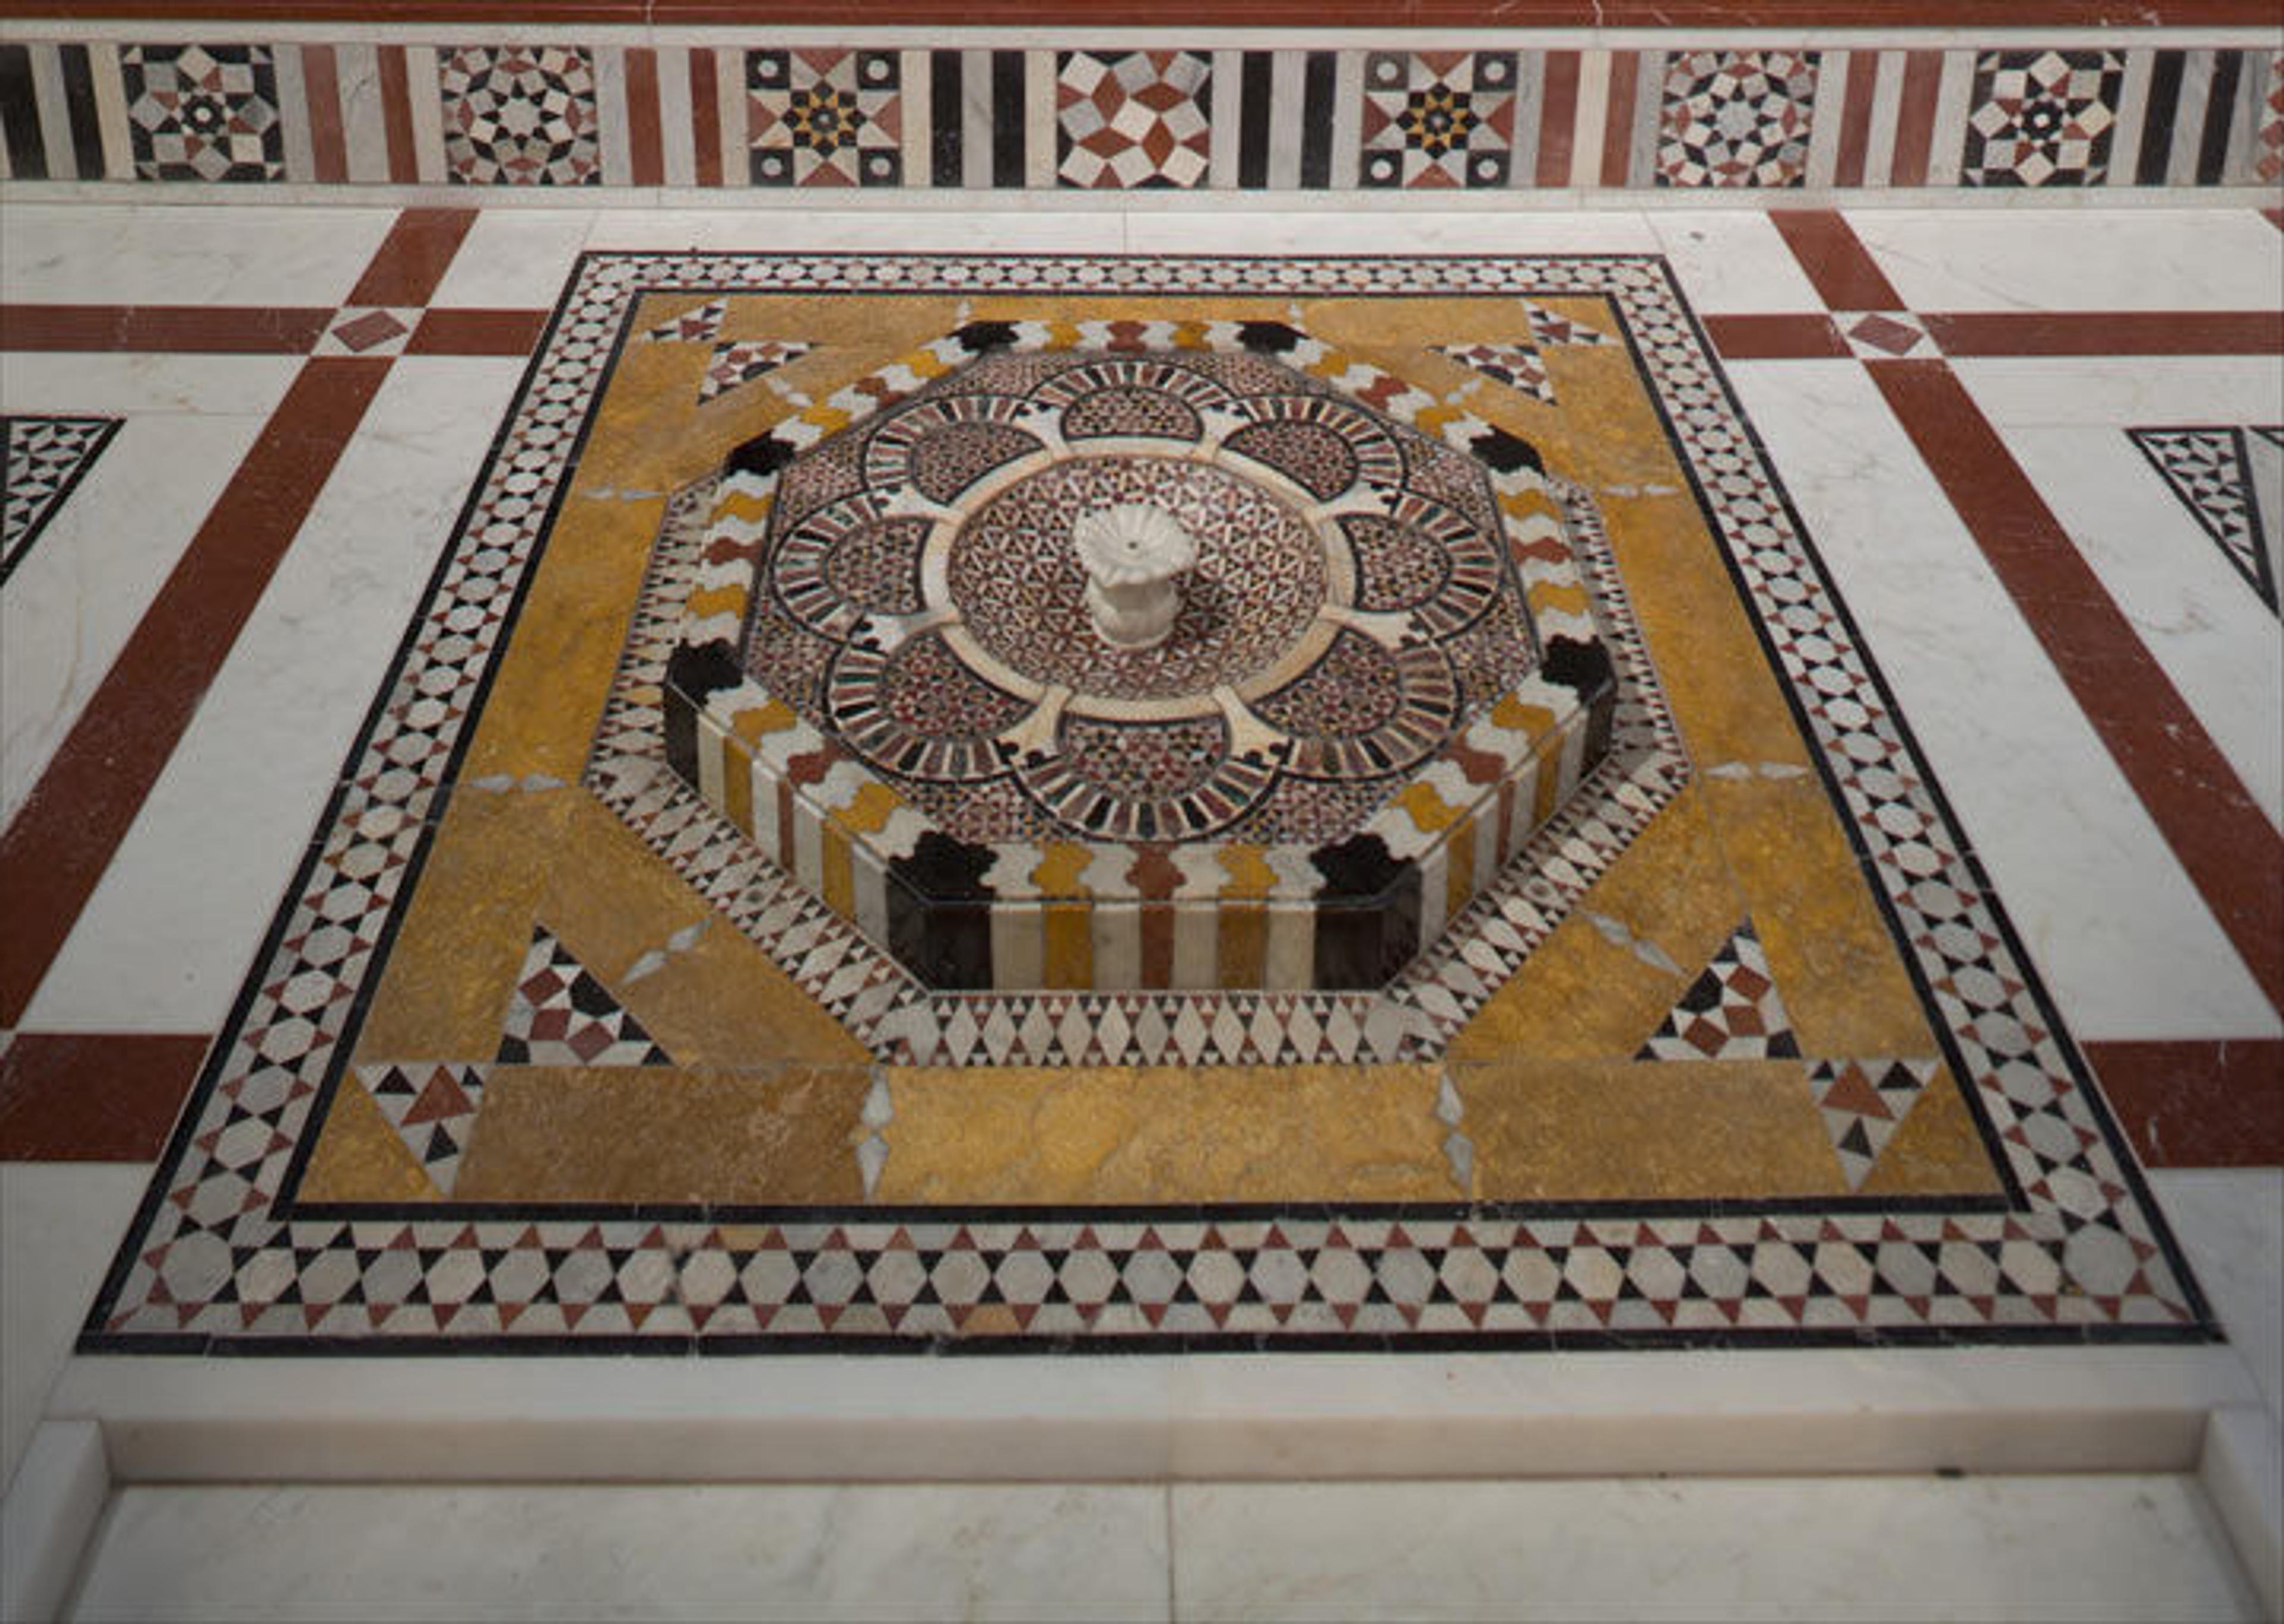 Detail view of mosaic tile on the floor of the Damascus Room